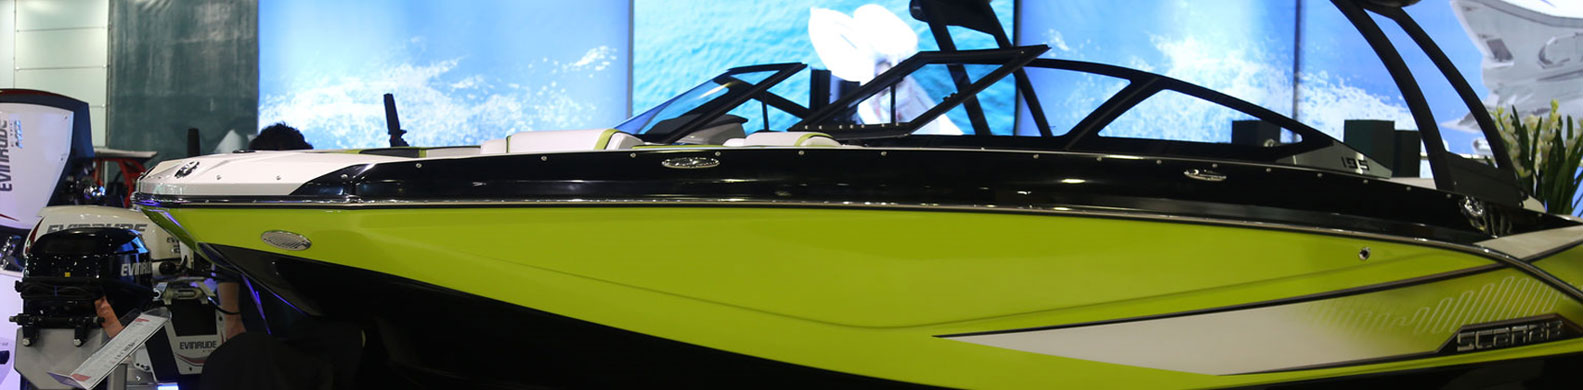 Boat Show Services